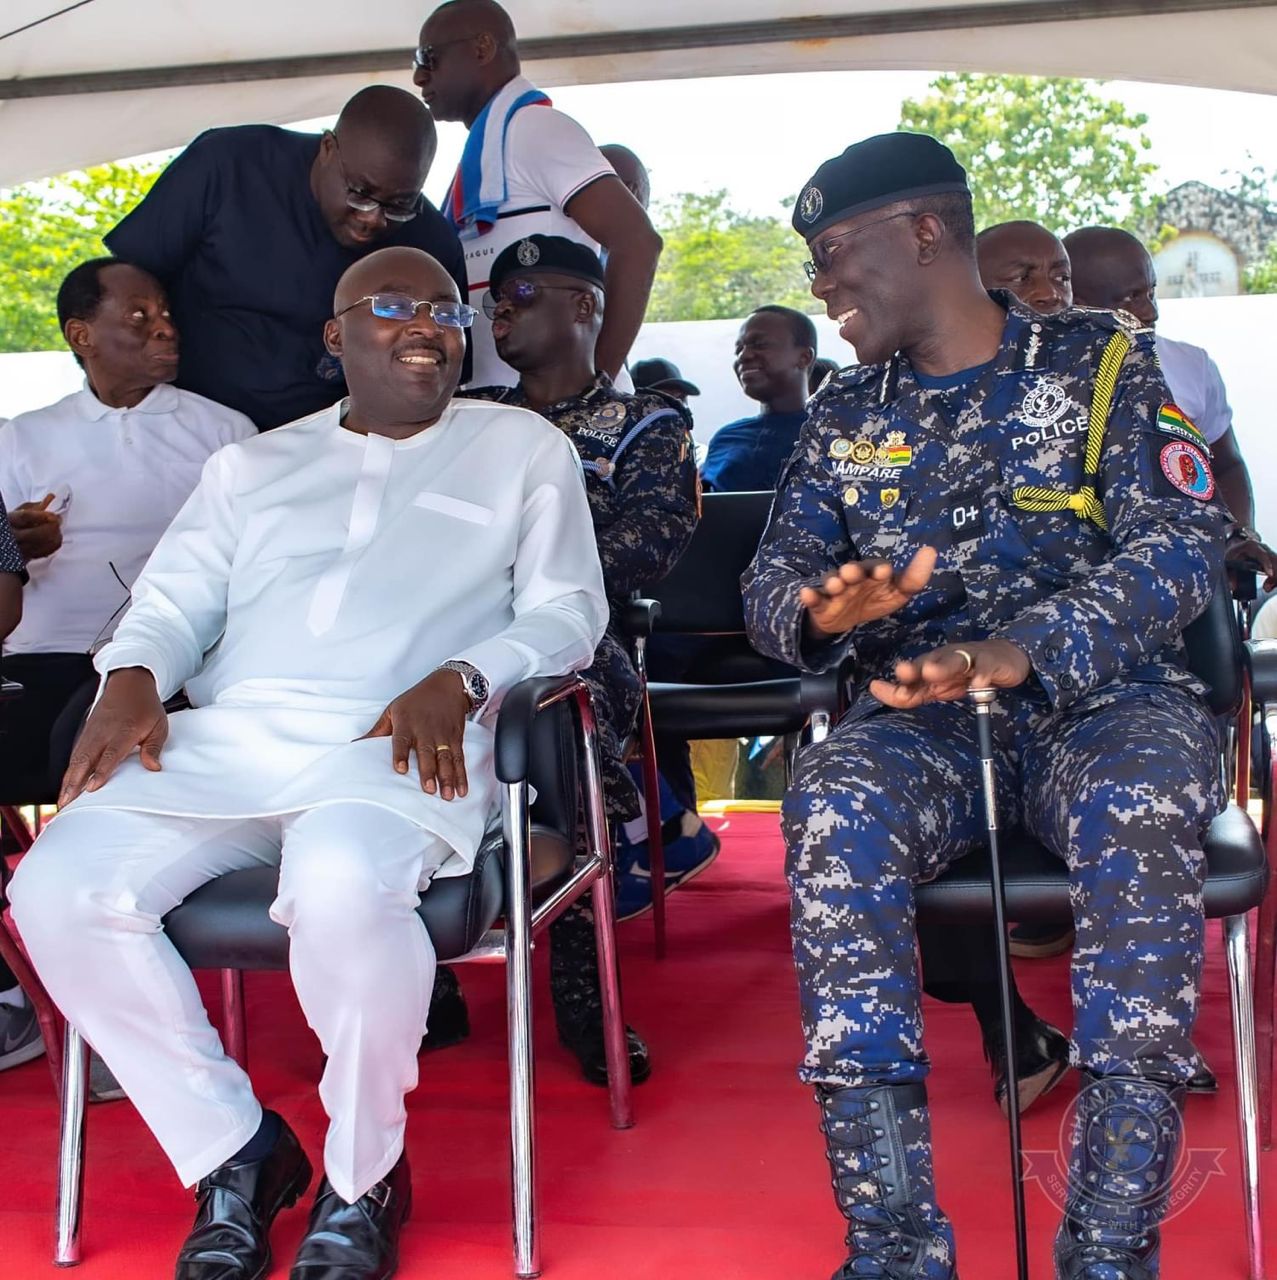 Bawumia hails Dampare for increased Police professionalism and discipline